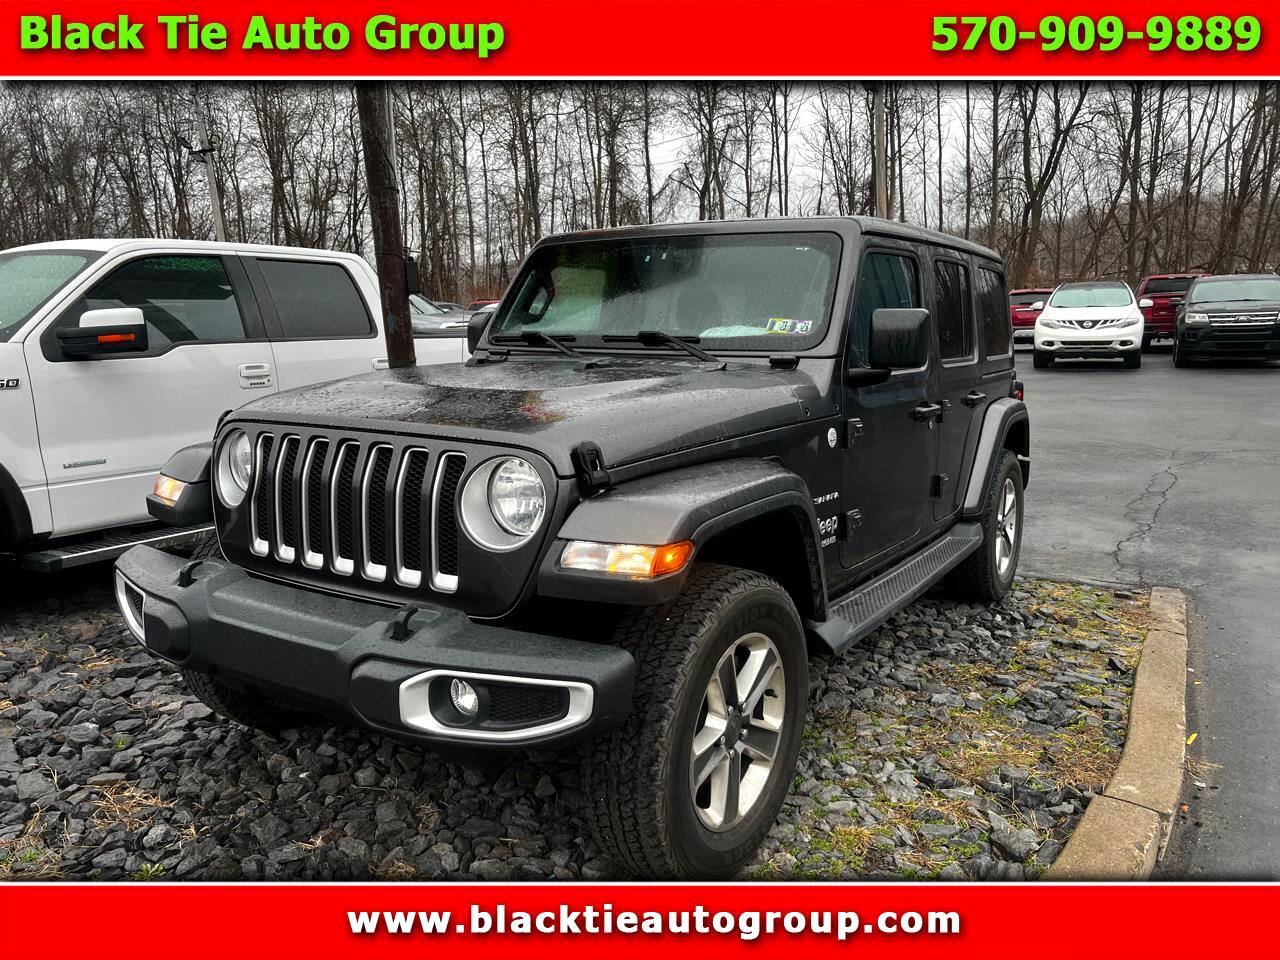 Used 2018 Jeep Wrangler Unlimited Sahara 4x4 for Sale in Scranton PA 18504  Black Tie Auto Group